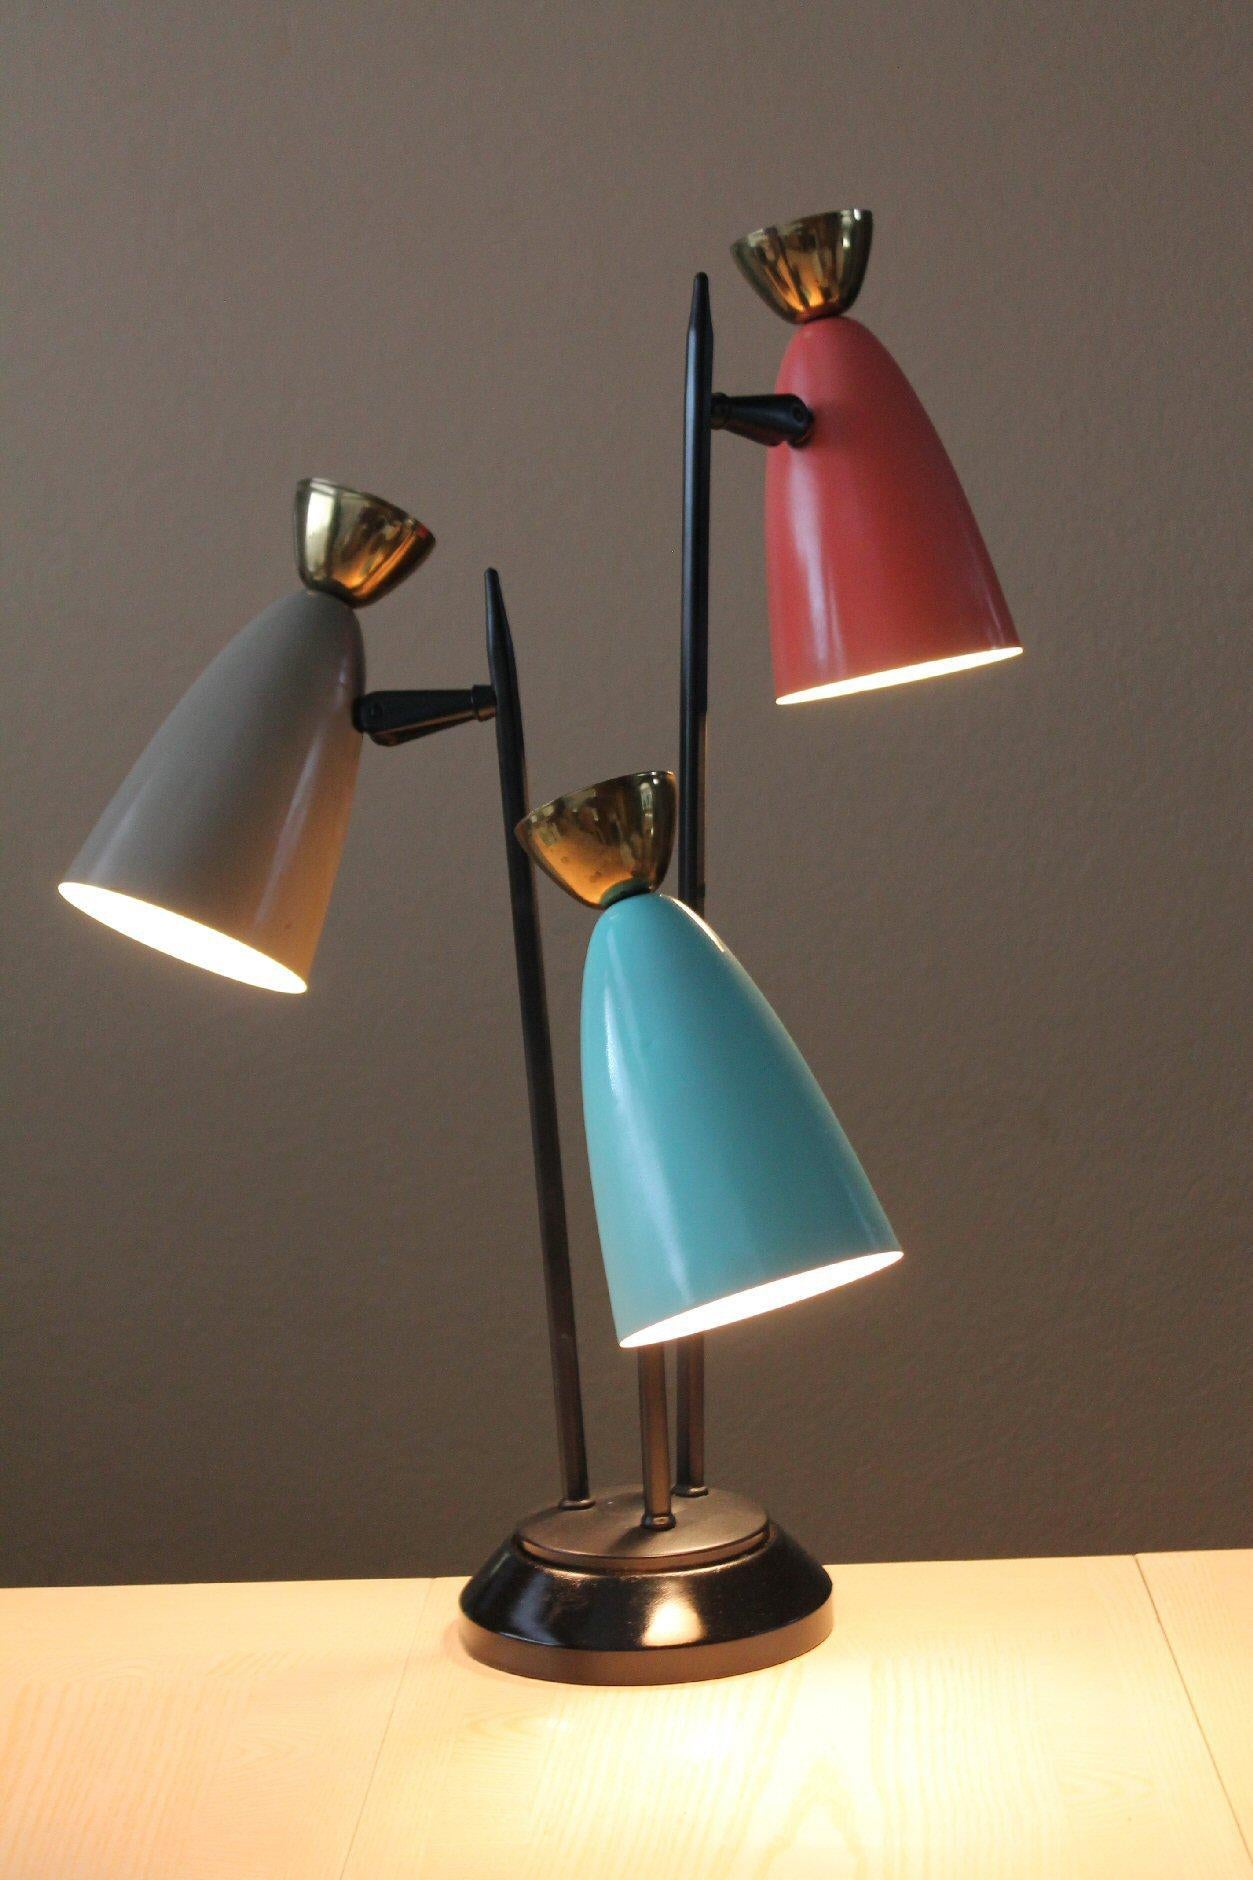 MAGNIFICENT!

3 -SHADE ARTICULATING TRIENNALE STYLE TABLE LAMP
IN THE MANNER OF LIGHTOLIER DESIGNS 
BY GERALD THURSTON & GINO SARFATTI

GREAT STYLE!   
EPIC FUNCTIONALITY!

CIRCA:1955
 
DIMENSIONS:  APPROXIMATELY 20